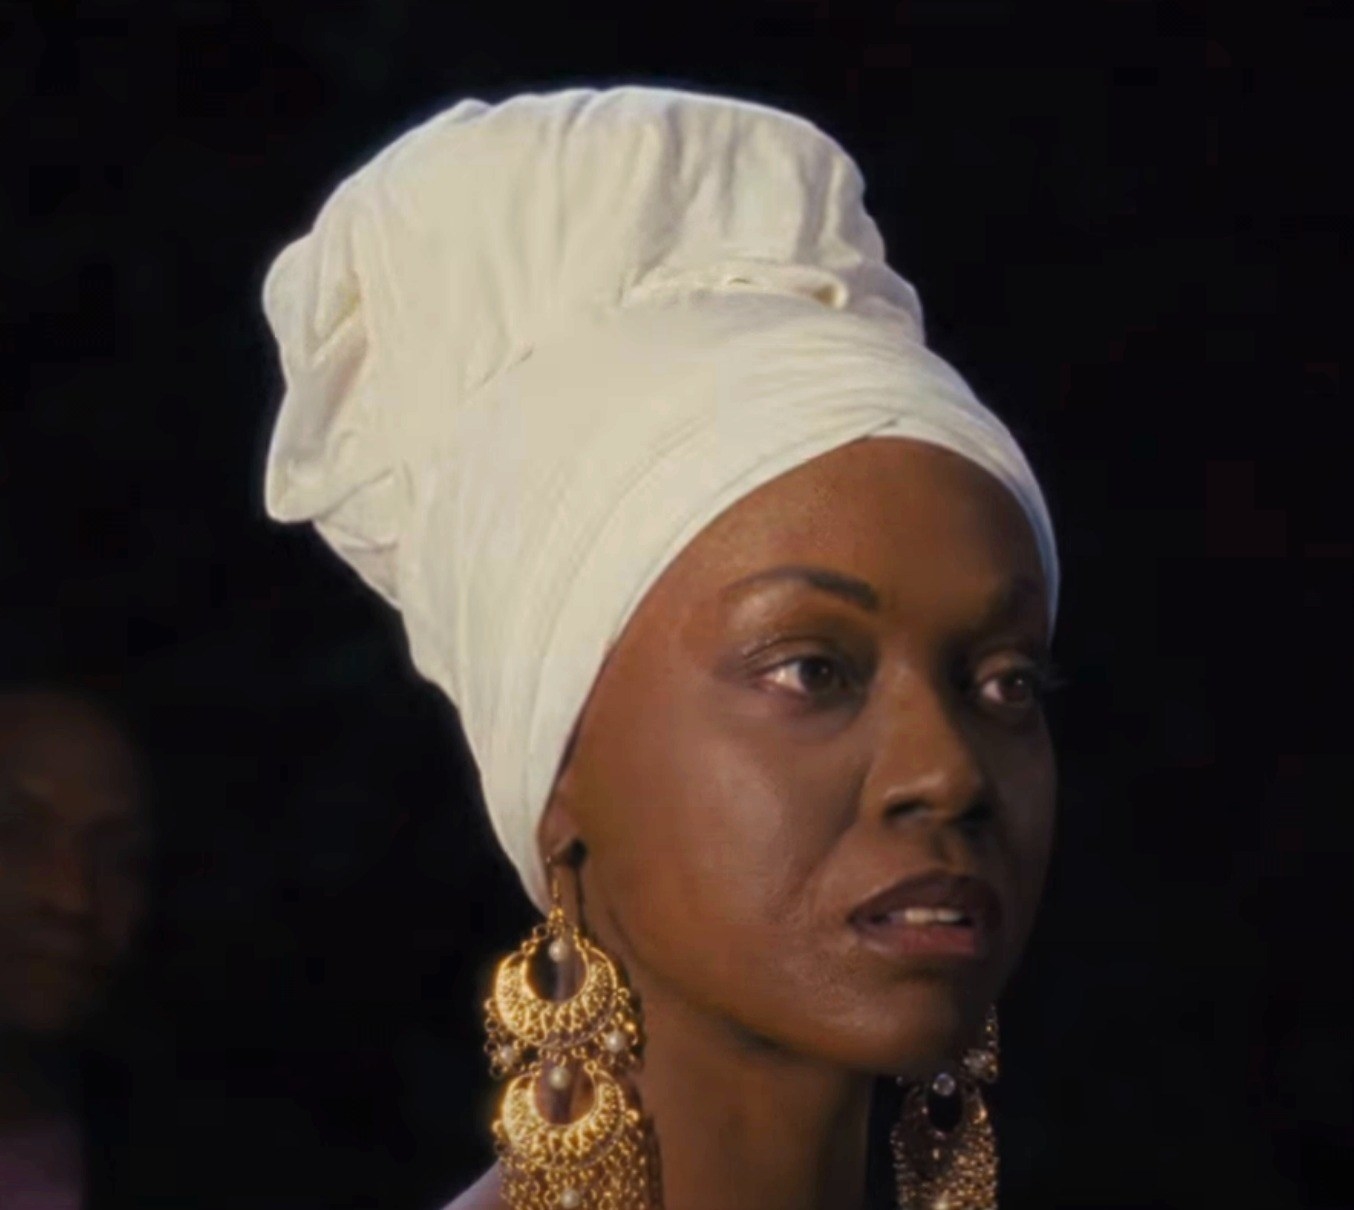 Close-up of Zoe with long earrings, a head wrap, and darkened skin